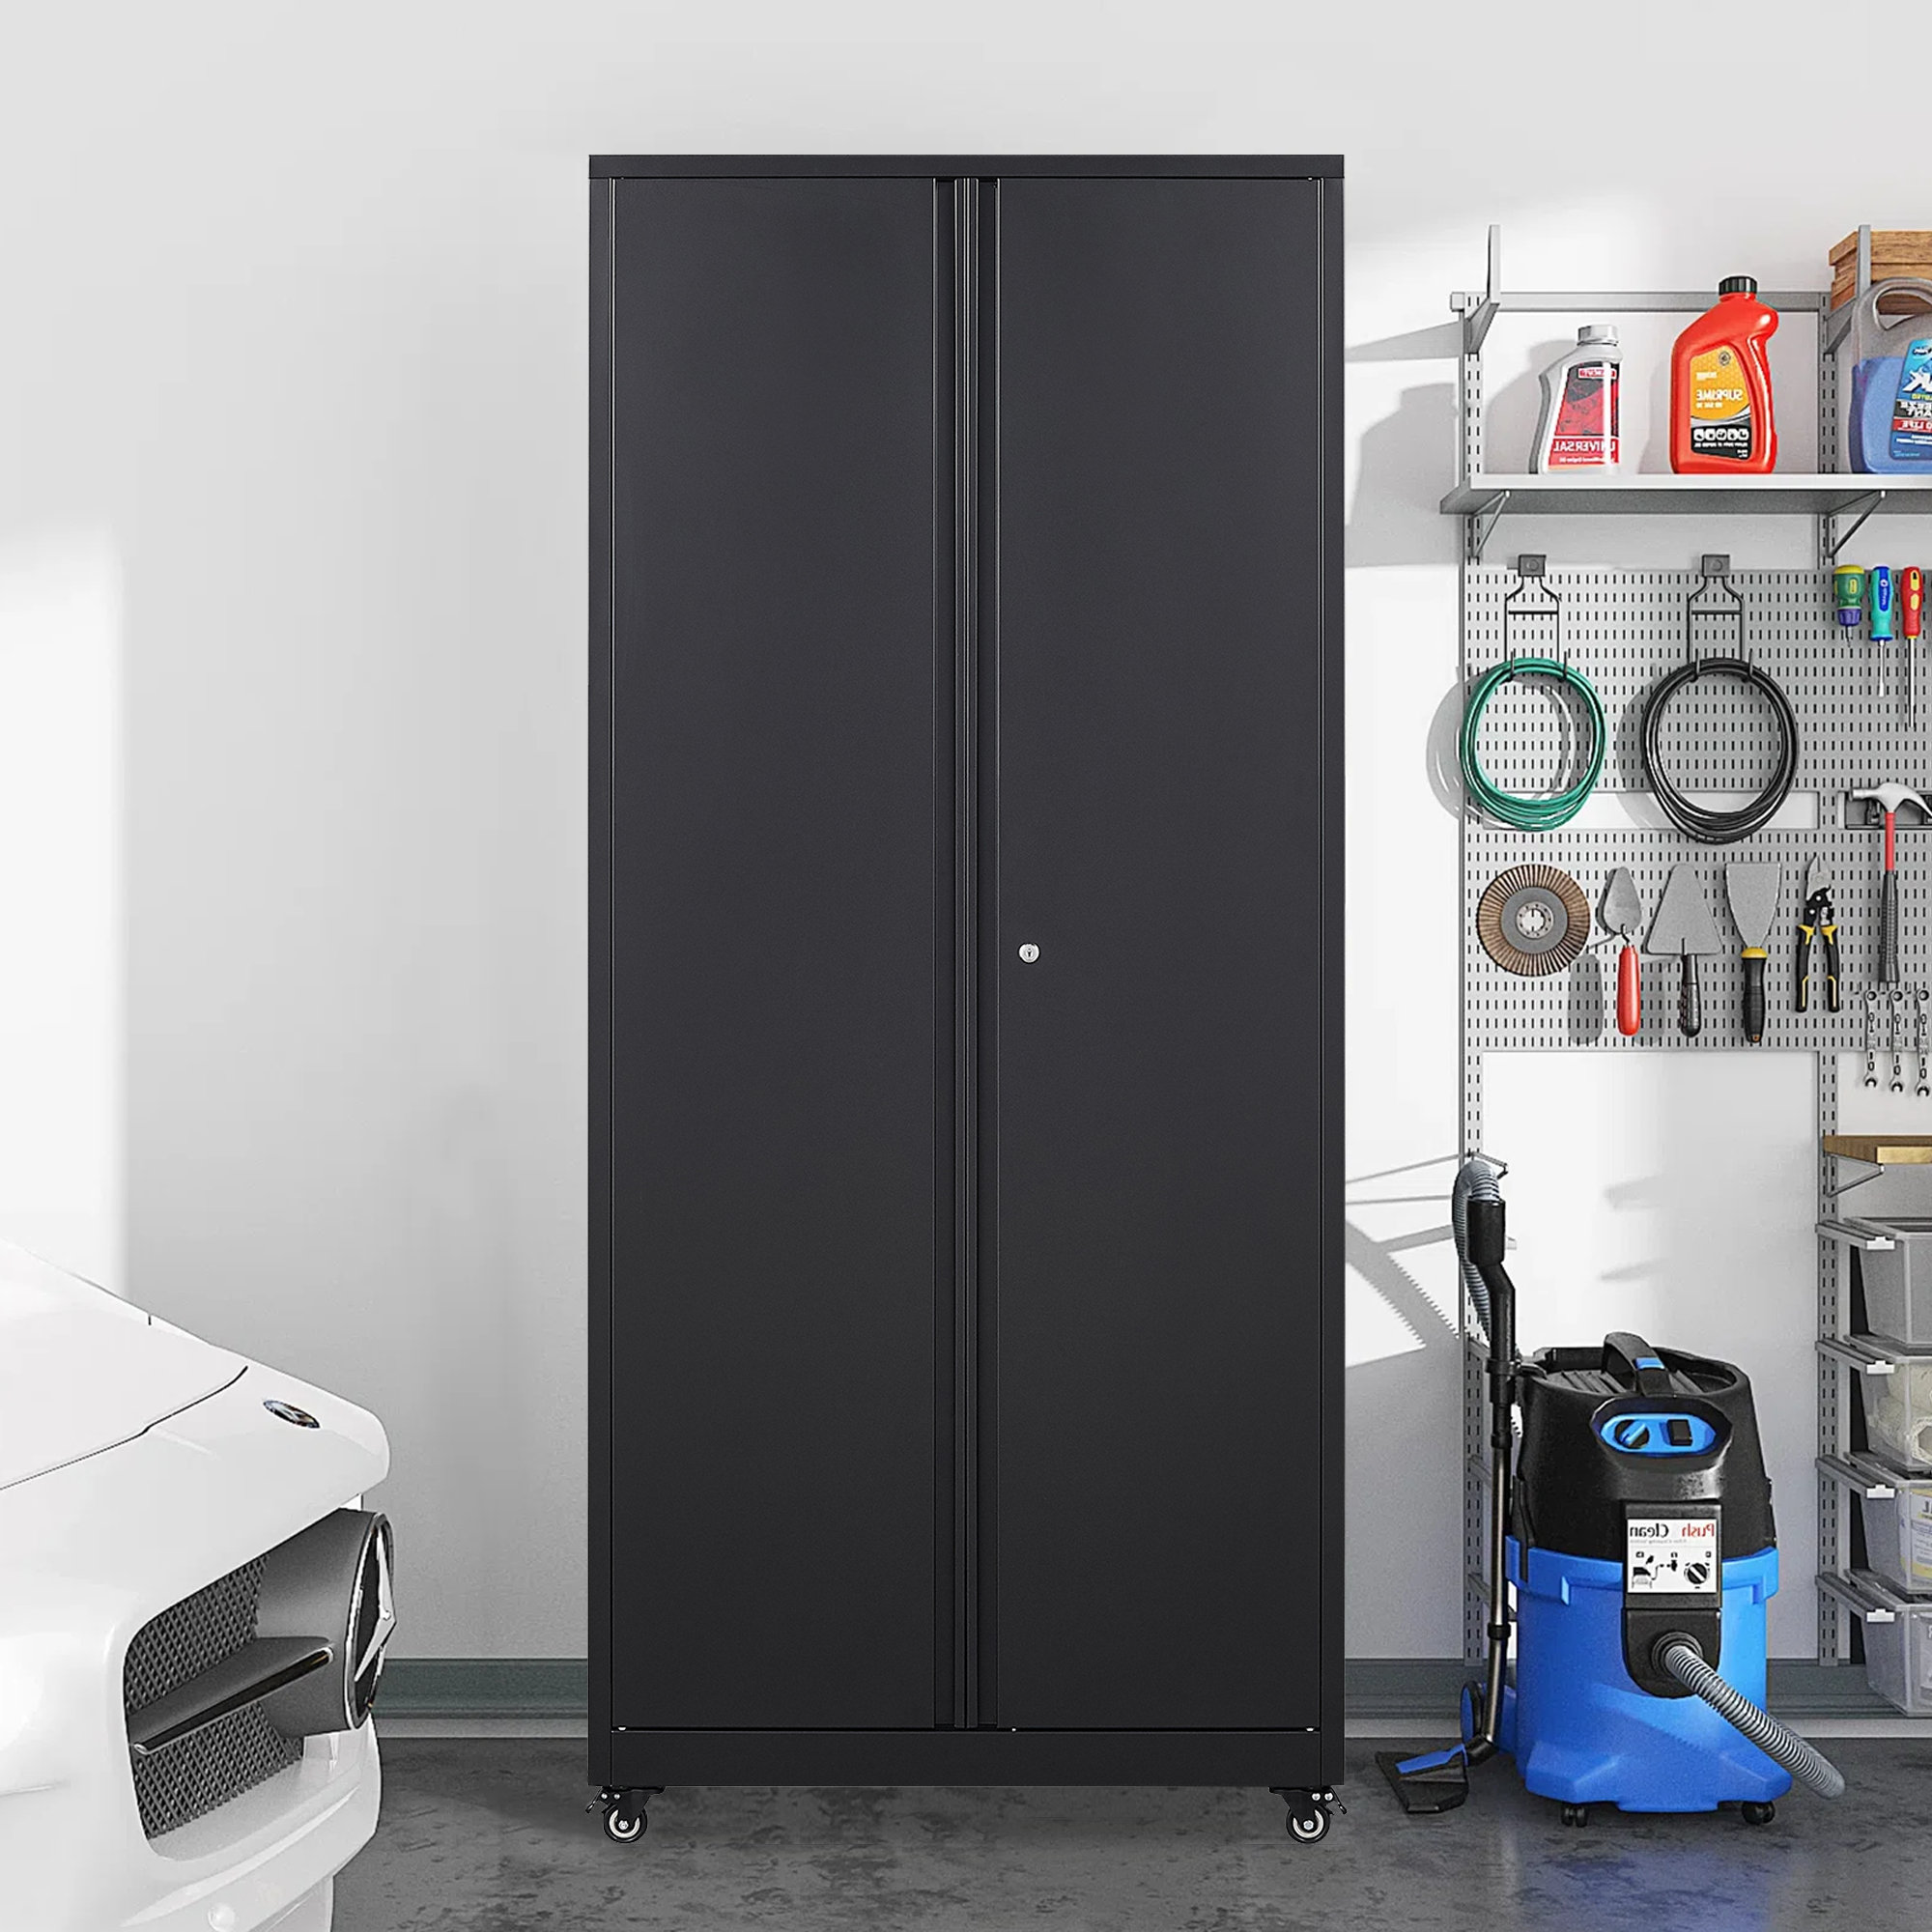 WorkPro Storage Cabinet, Metal Garage Cabinets with Doors and Shelves, Tall Locking Steel Cabinet for Tools Office Home Shops, 71 H x 31-1/2 W x